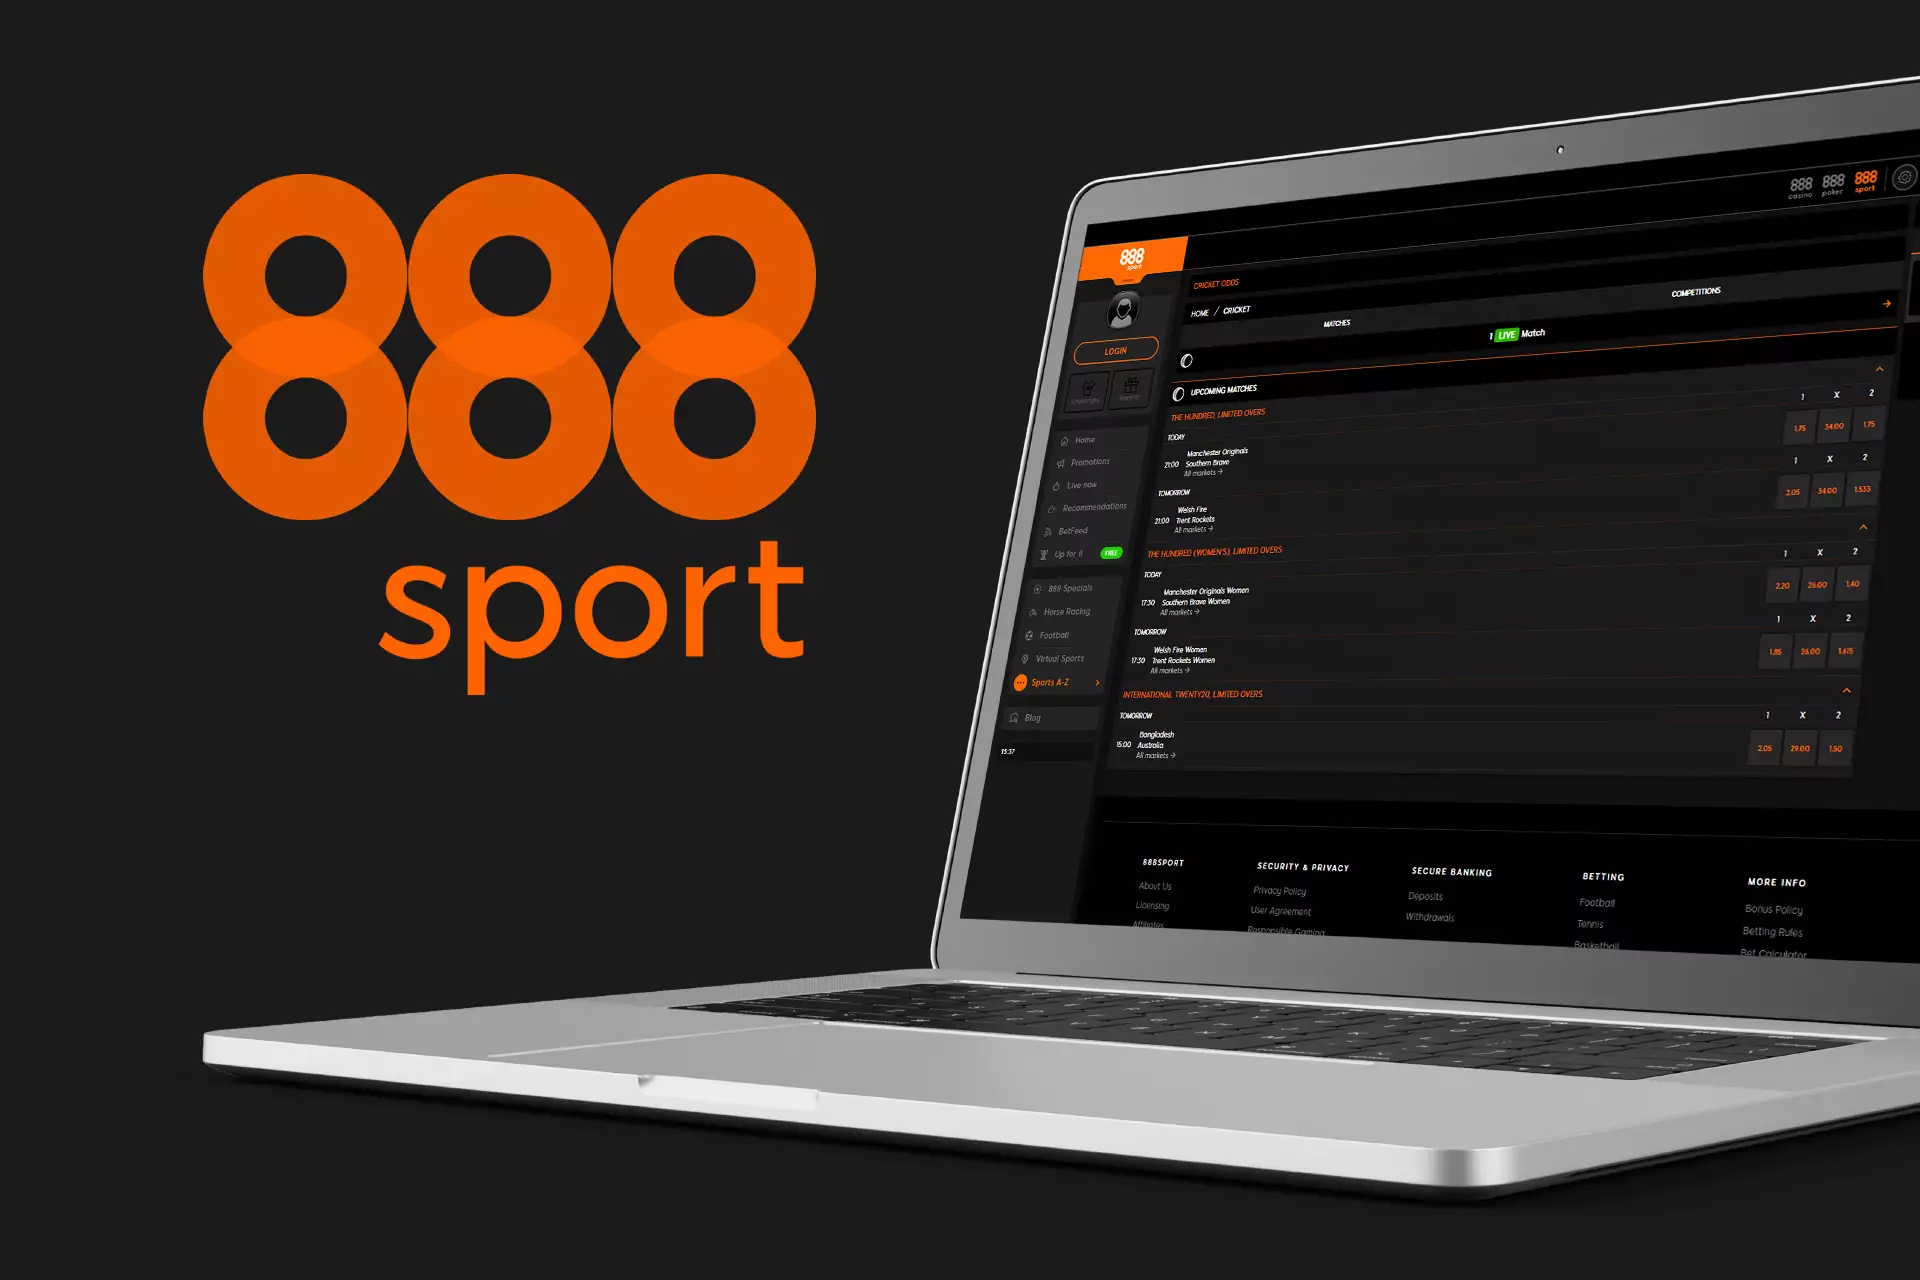 On 888sport you will find a perfect range of sports and esports disciplines.